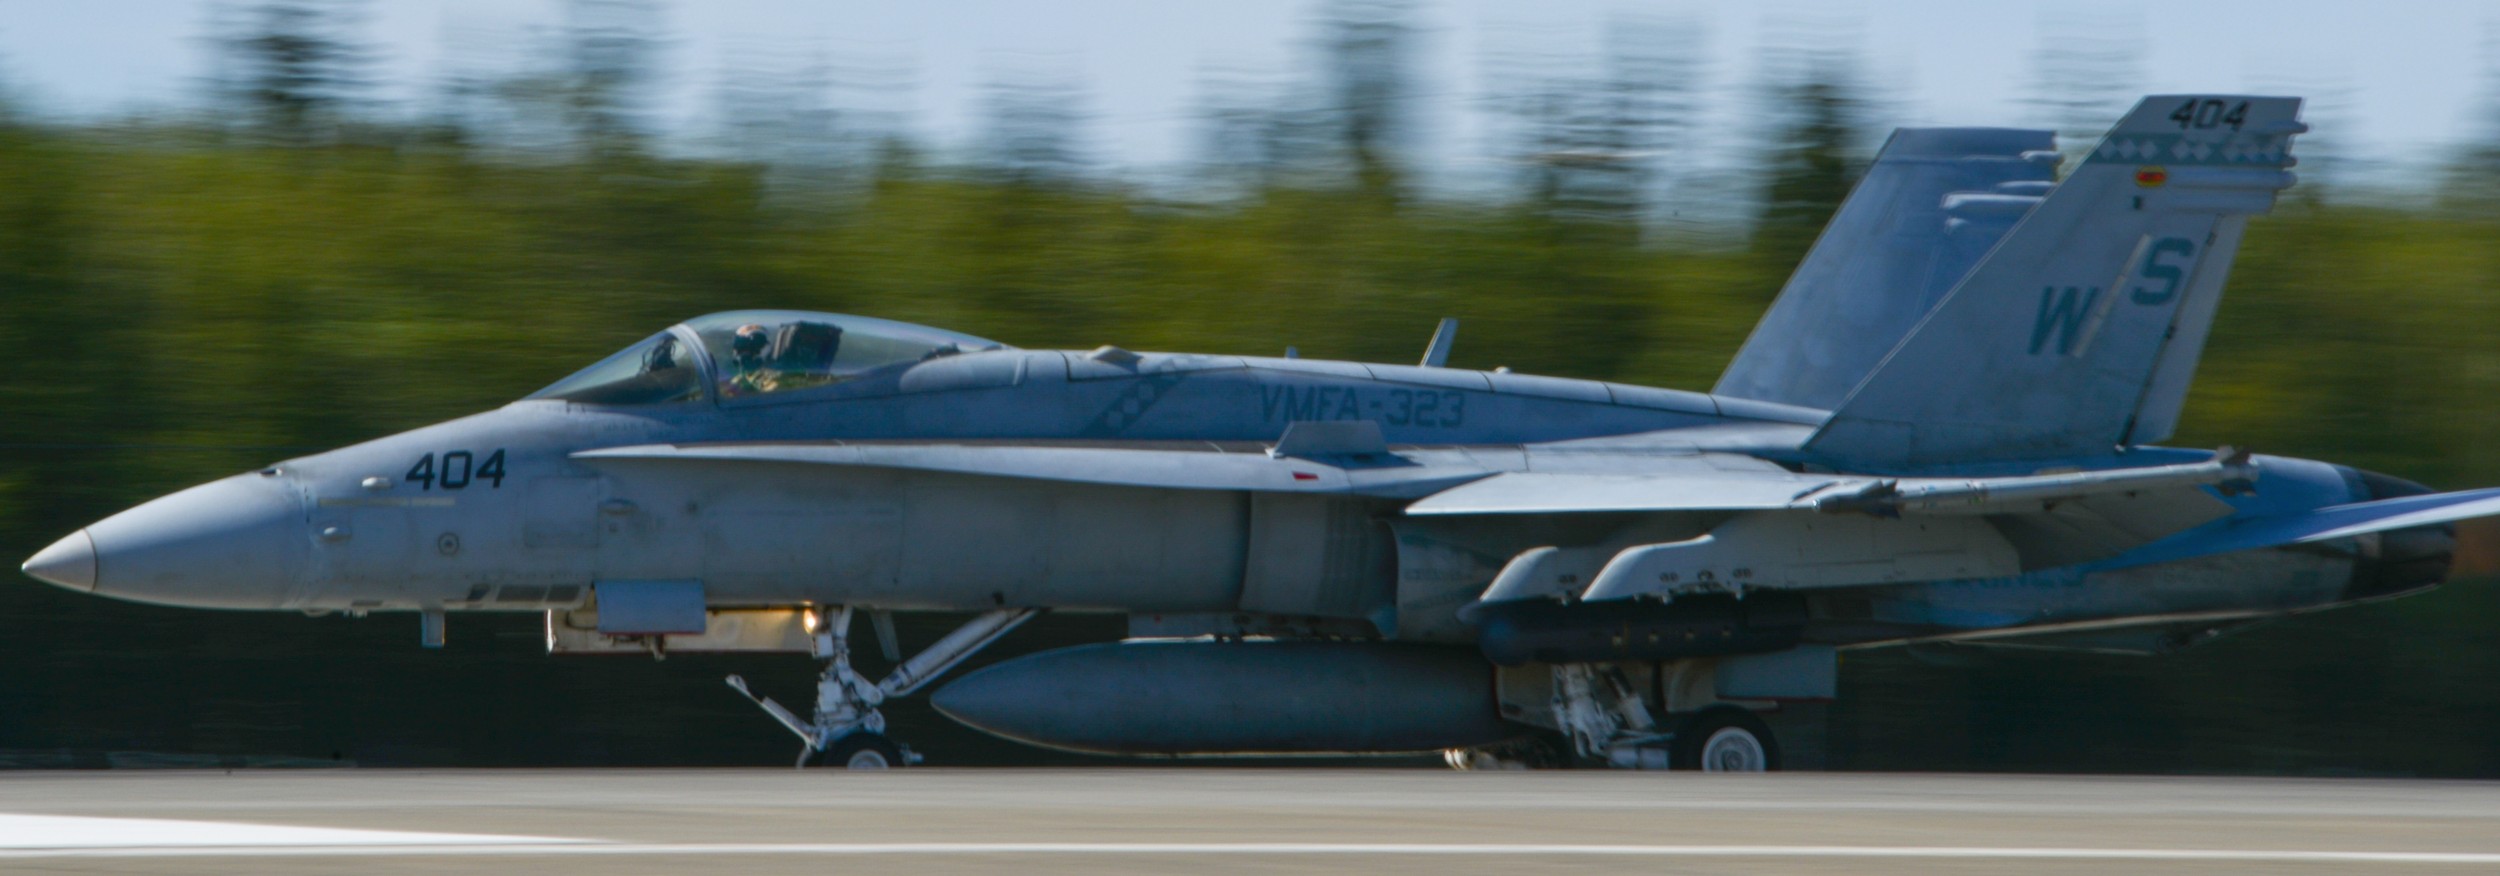 vmfa-323 death rattlers marine fighter attack squadron f/a-18c hornet 154 red flag alaska eielson afb